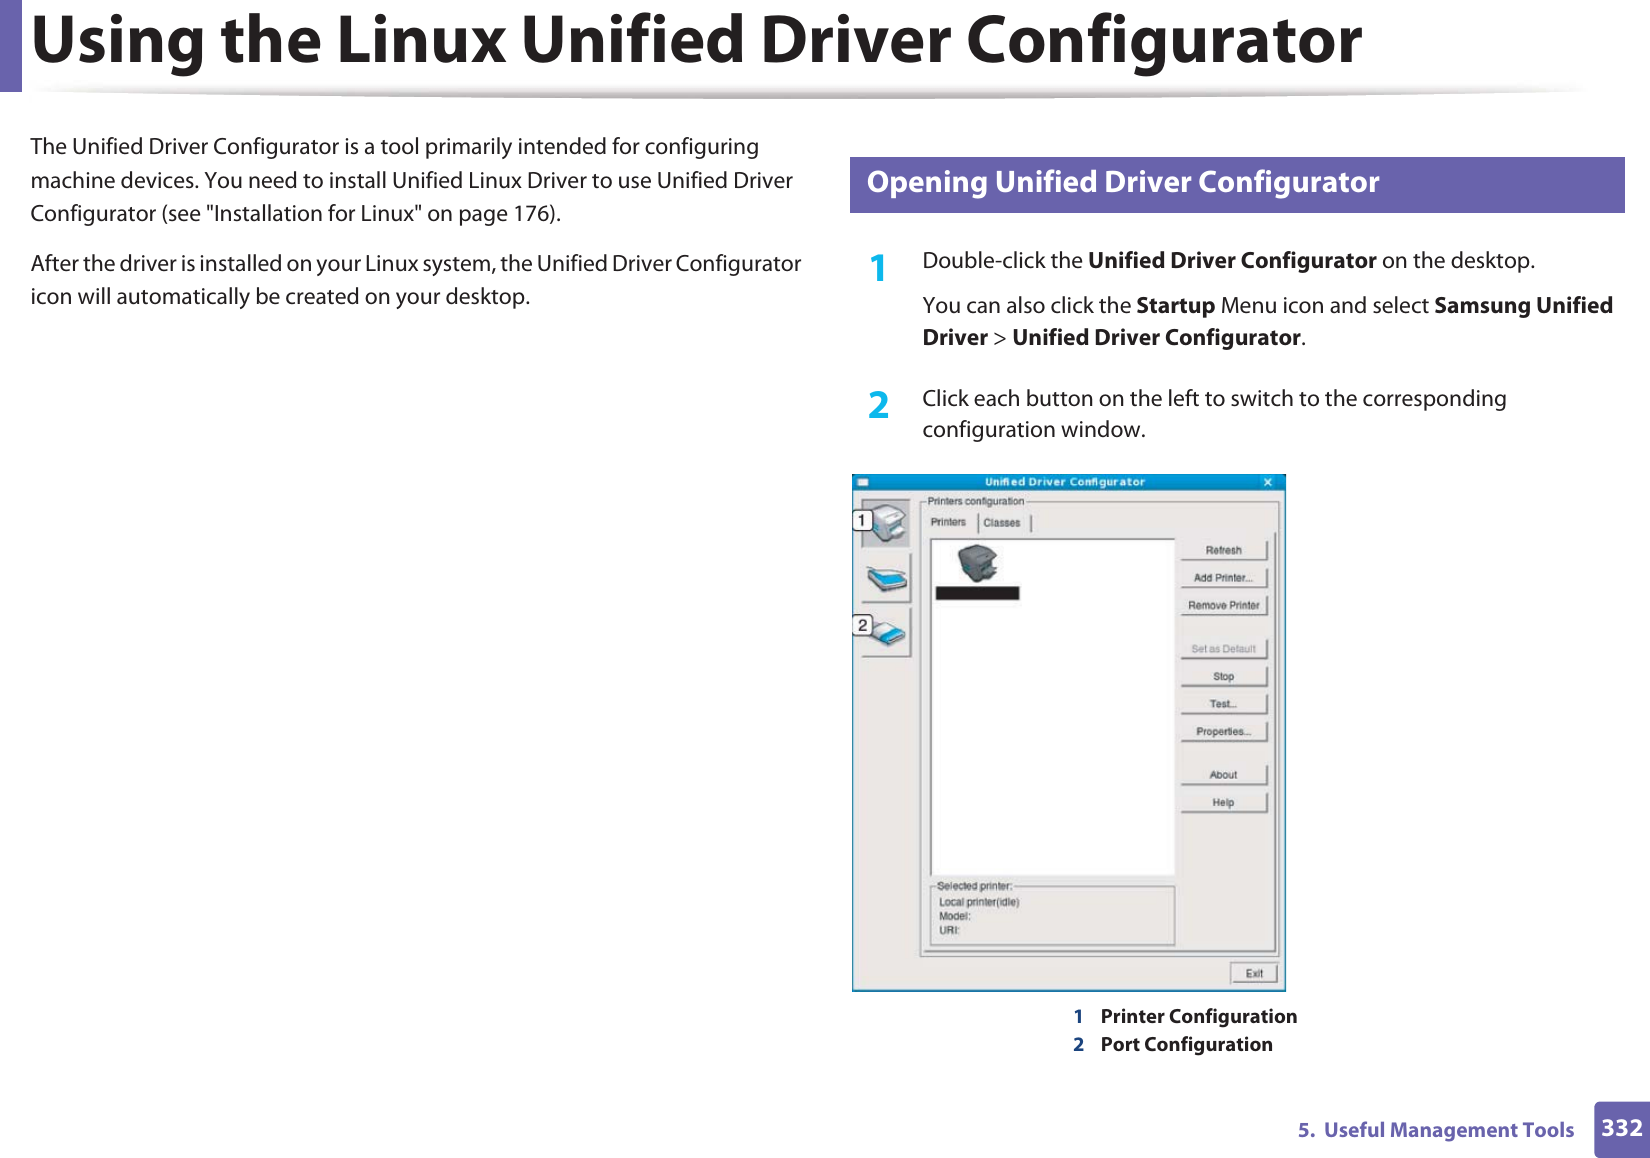 3325.  Useful Management ToolsUsing the Linux Unified Driver ConfiguratorThe Unified Driver Configurator is a tool primarily intended for configuring machine devices. You need to install Unified Linux Driver to use Unified Driver Configurator (see &quot;Installation for Linux&quot; on page 176).After the driver is installed on your Linux system, the Unified Driver Configurator icon will automatically be created on your desktop.11 Opening Unified Driver Configurator1Double-click the Unified Driver Configurator on the desktop.You can also click the Startup Menu icon and select Samsung Unified Driver &gt; Unified Driver Configurator.2  Click each button on the left to switch to the corresponding configuration window.1Printer Configuration 2Port Configuration 